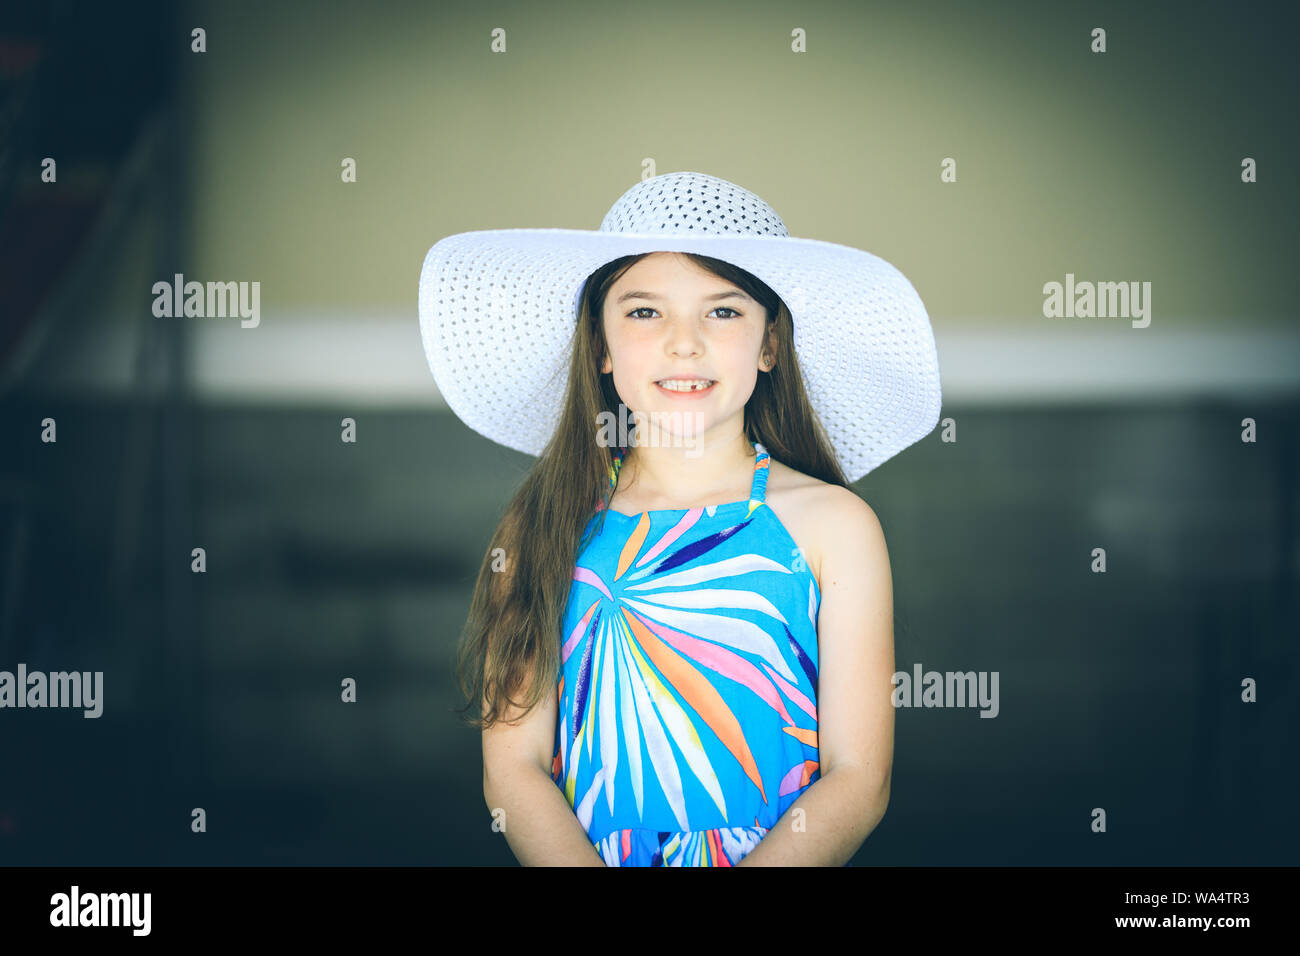 Little girl in dress and big white hat Stock Photo